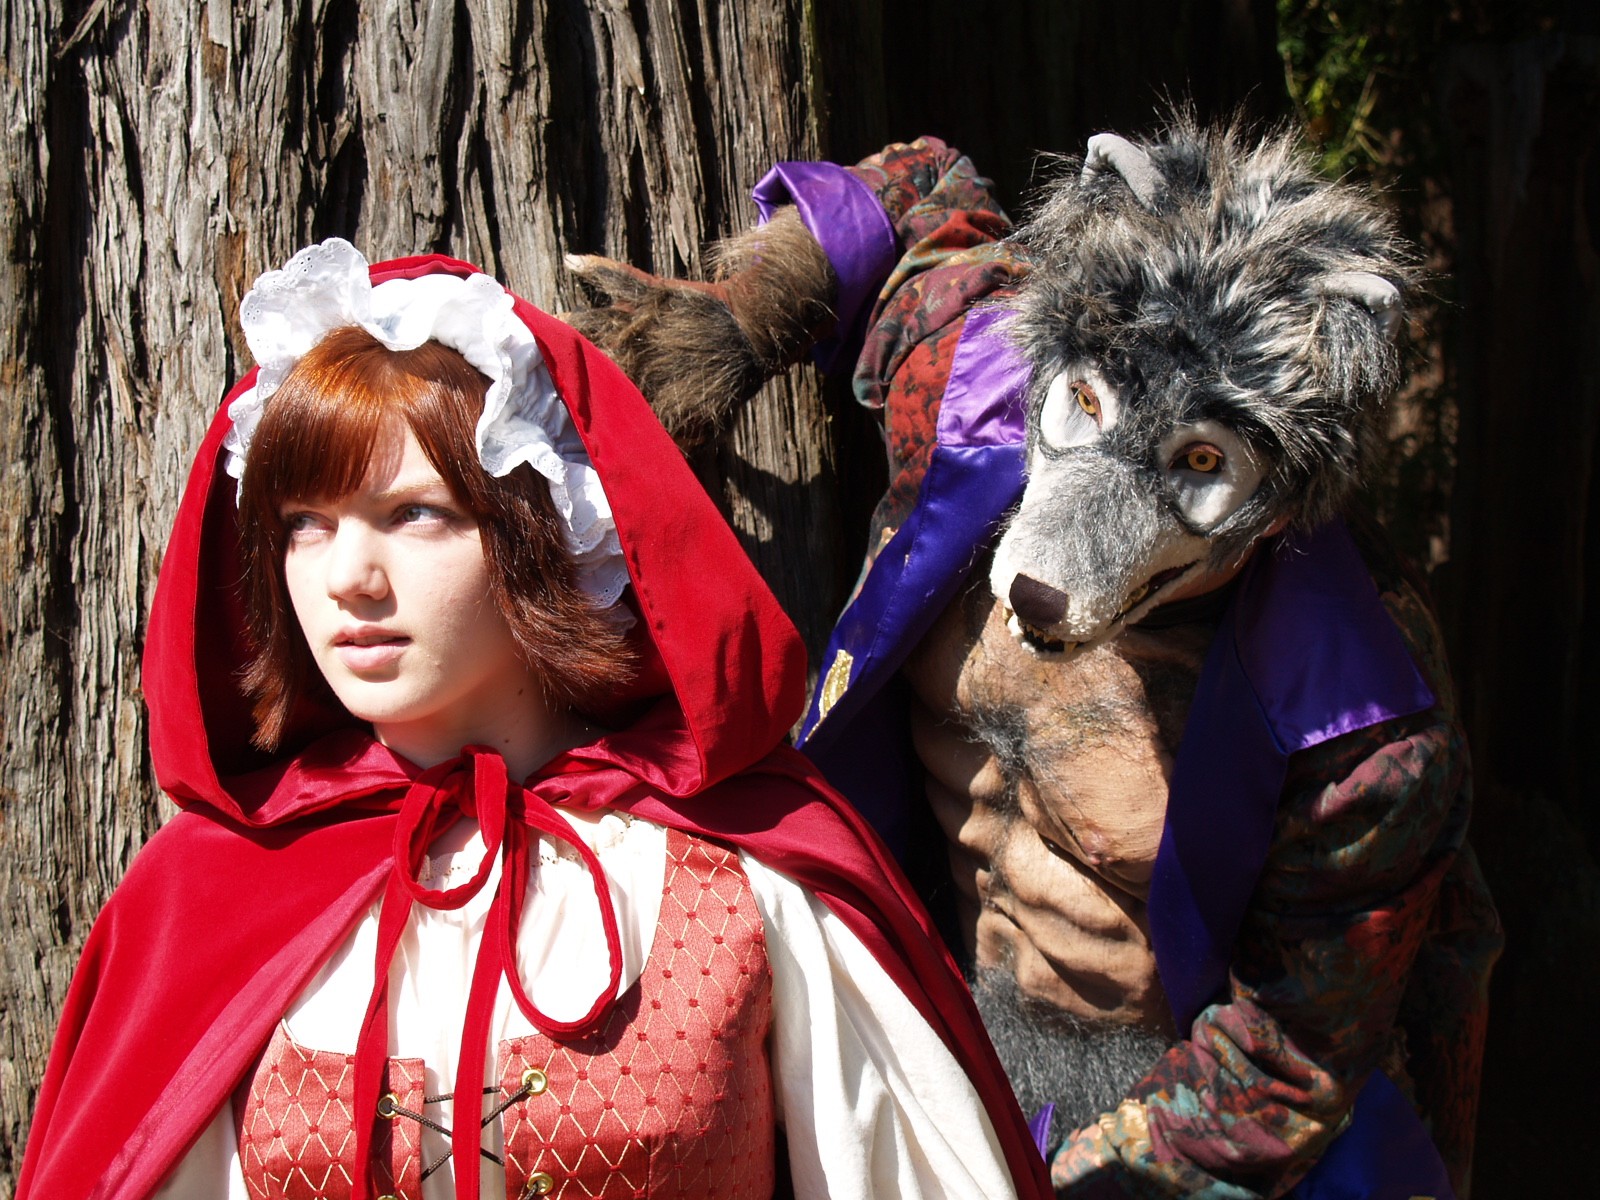 Katy Curtis as Little Red Riding Hood, Luke Sikora as The Wolf in the NCRT production of Sondheim's Into the Woods - COURTESY OF NCRT